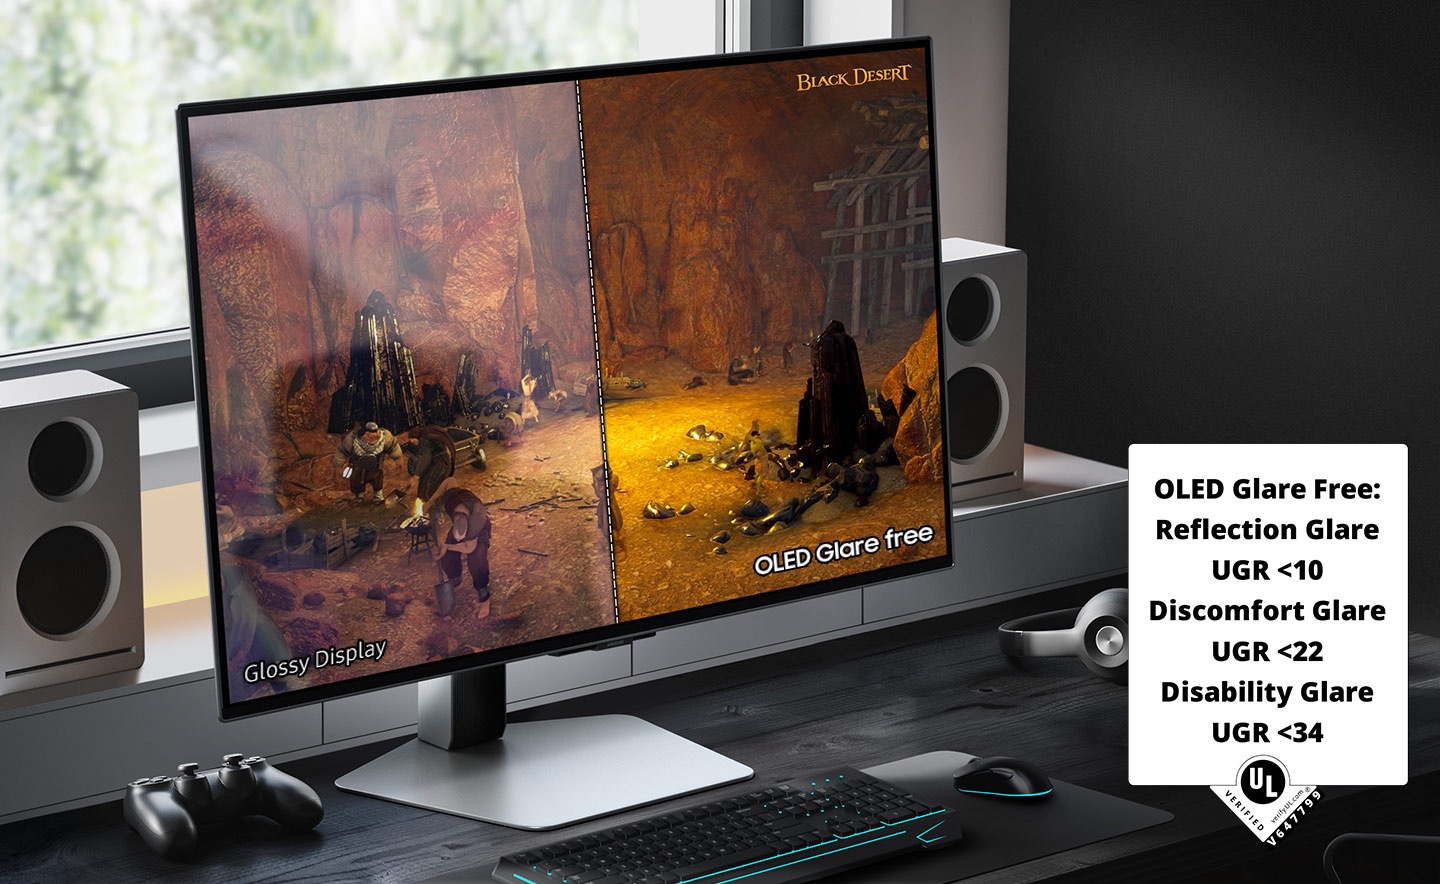 A monitor sits on a desk in front of a window, with a mouse, keyboard, headphones and speakers on the desk. The monitor shows a scene from the game Black Desert, split in half. The right side of the monitor, labeled "OLED Glare Free" is more clear with less reflection than the left side, labeled, "Glossy Display."A badge in the bottom right corner shares glare-free specifications, reading "OLED Glare Free: Reflection Glare UGR <10. Discomfort Glare UGR<22. Disability Glare UGR <34. UL, VERIFIED, verify.UL.com, V647799"